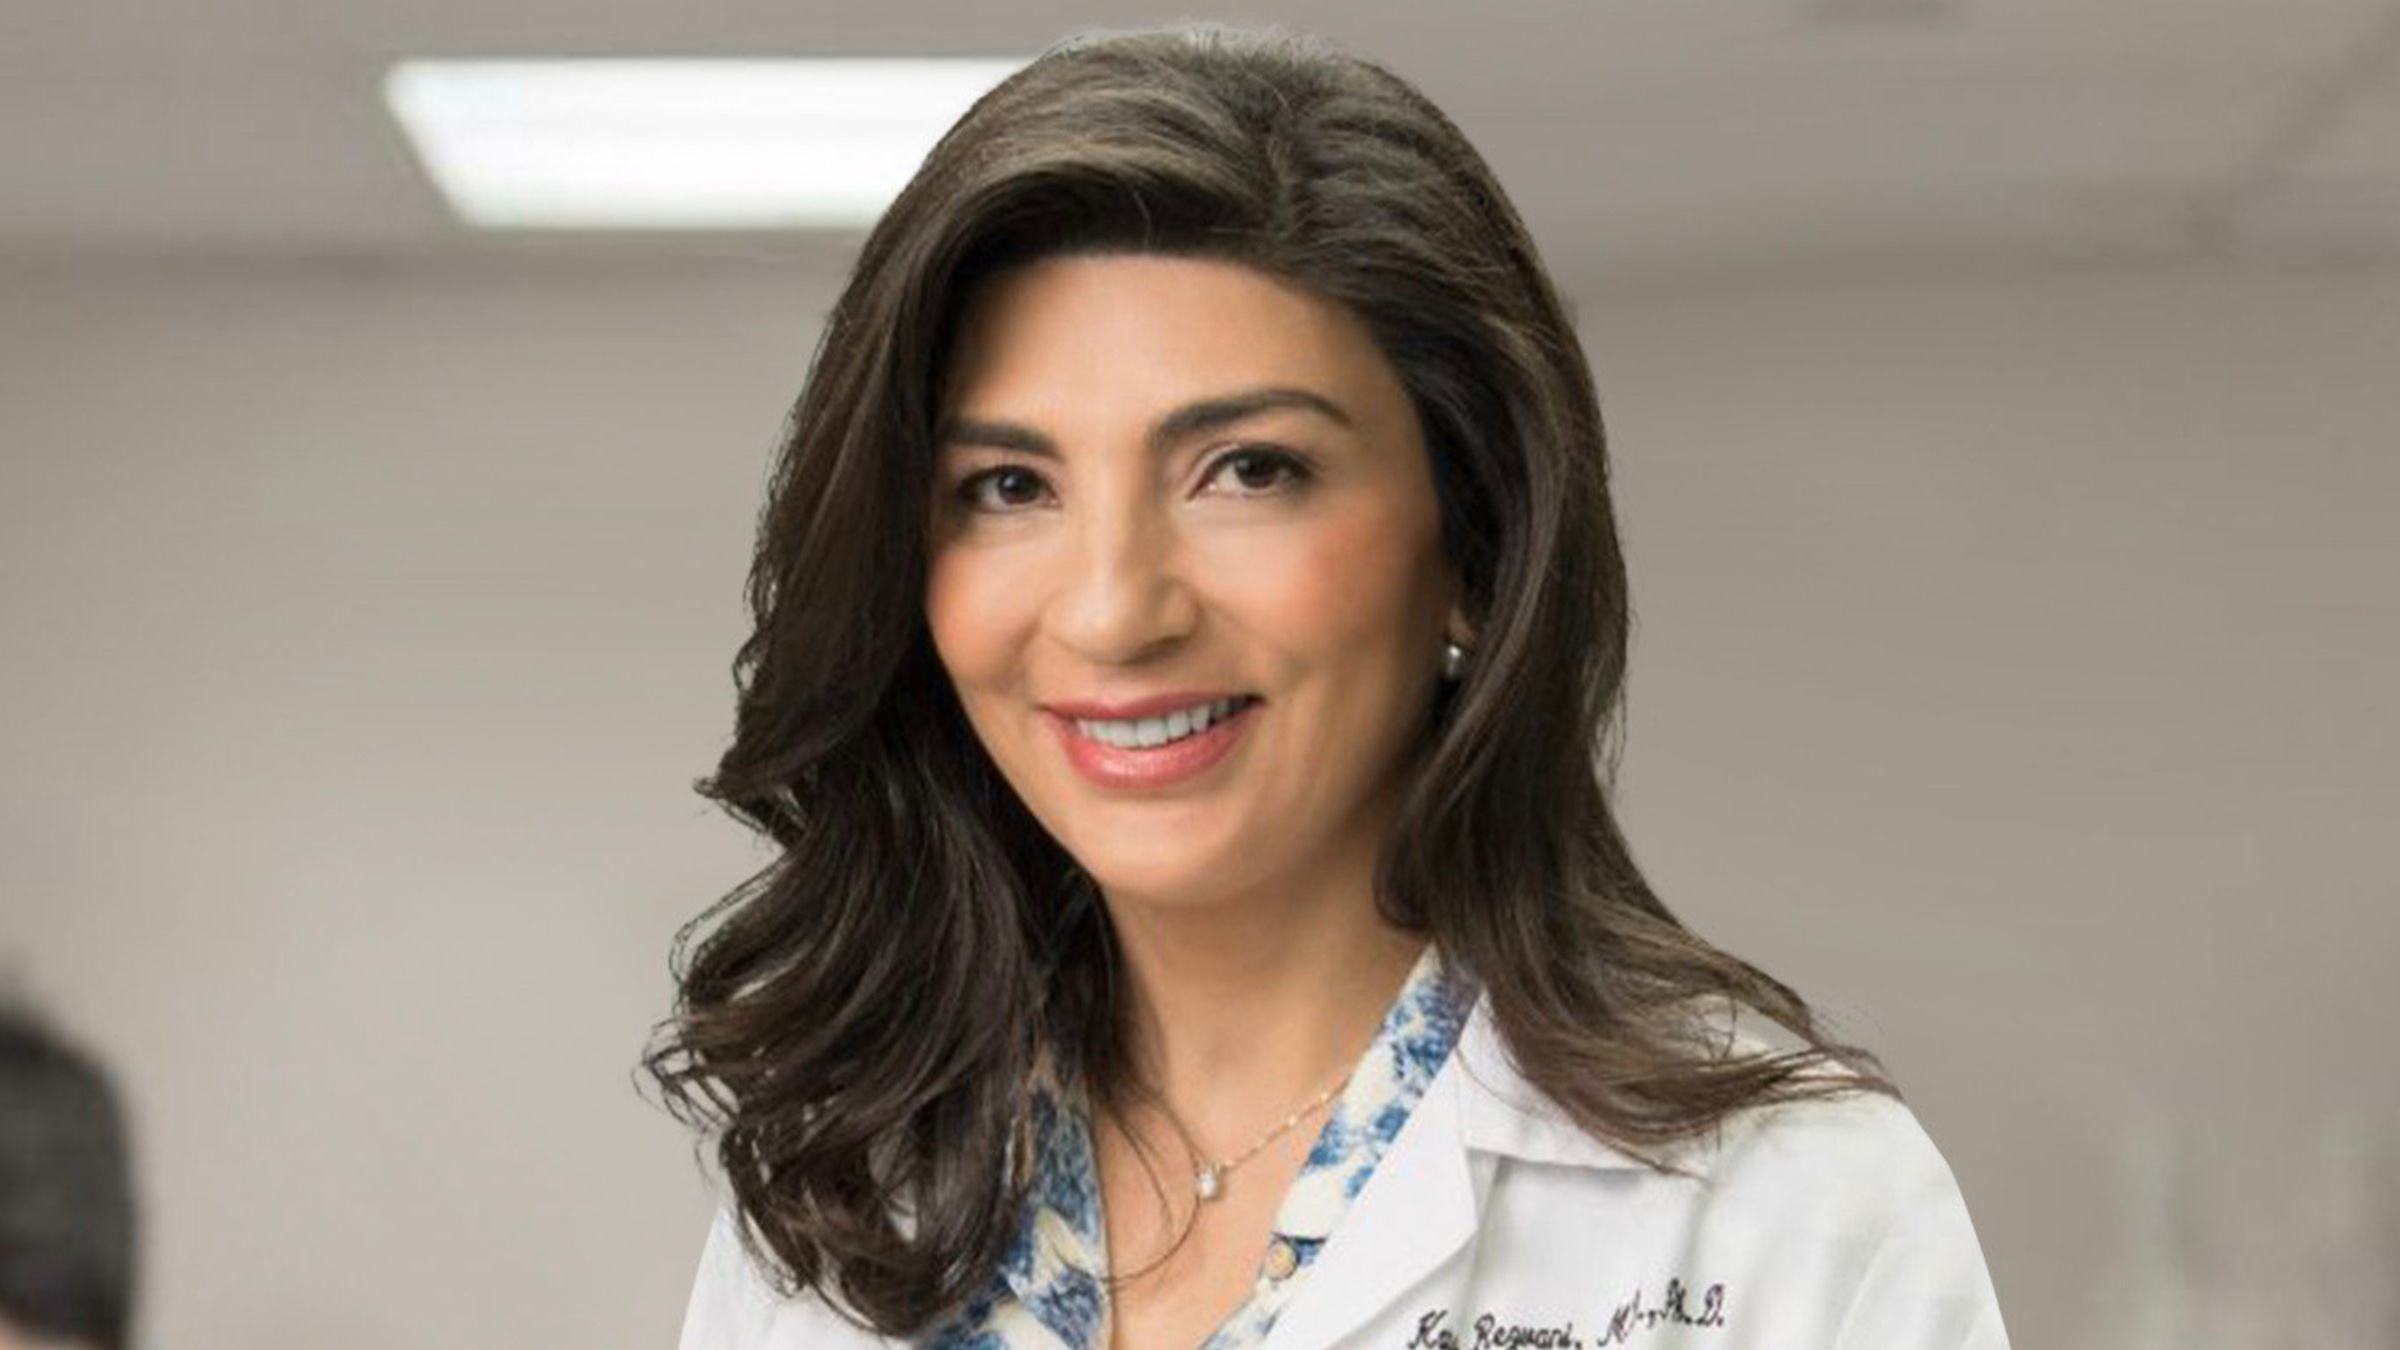 Replay partners with MD Anderson’s Katy Rezvani, heads to clinic with new TCR NK cell company